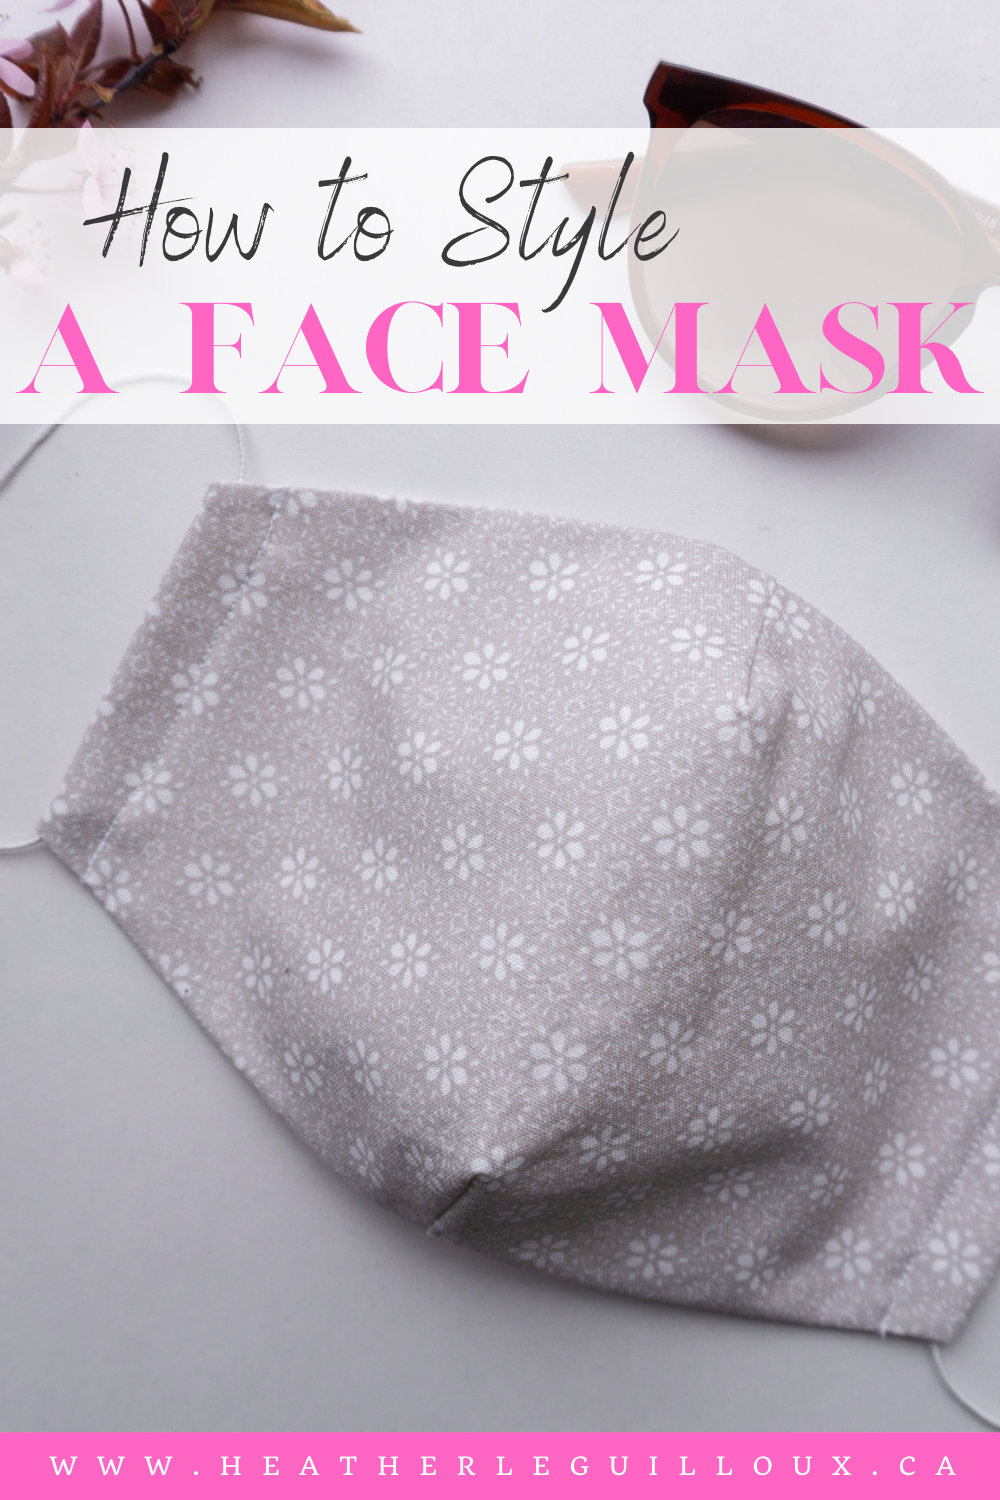 The current pandemic has meant that face masks are now a must. From buff stretchable face masks to standard use and dispose of masks, you can work your face mask into your daily style. We all have a personal style, even if we think we have no style at all. And you can express that with the safety of a mask. So how do you style a face mask to give yourself optimum safety and protection but still look and feel chic? #facemasks #pandemic #chic #style #health